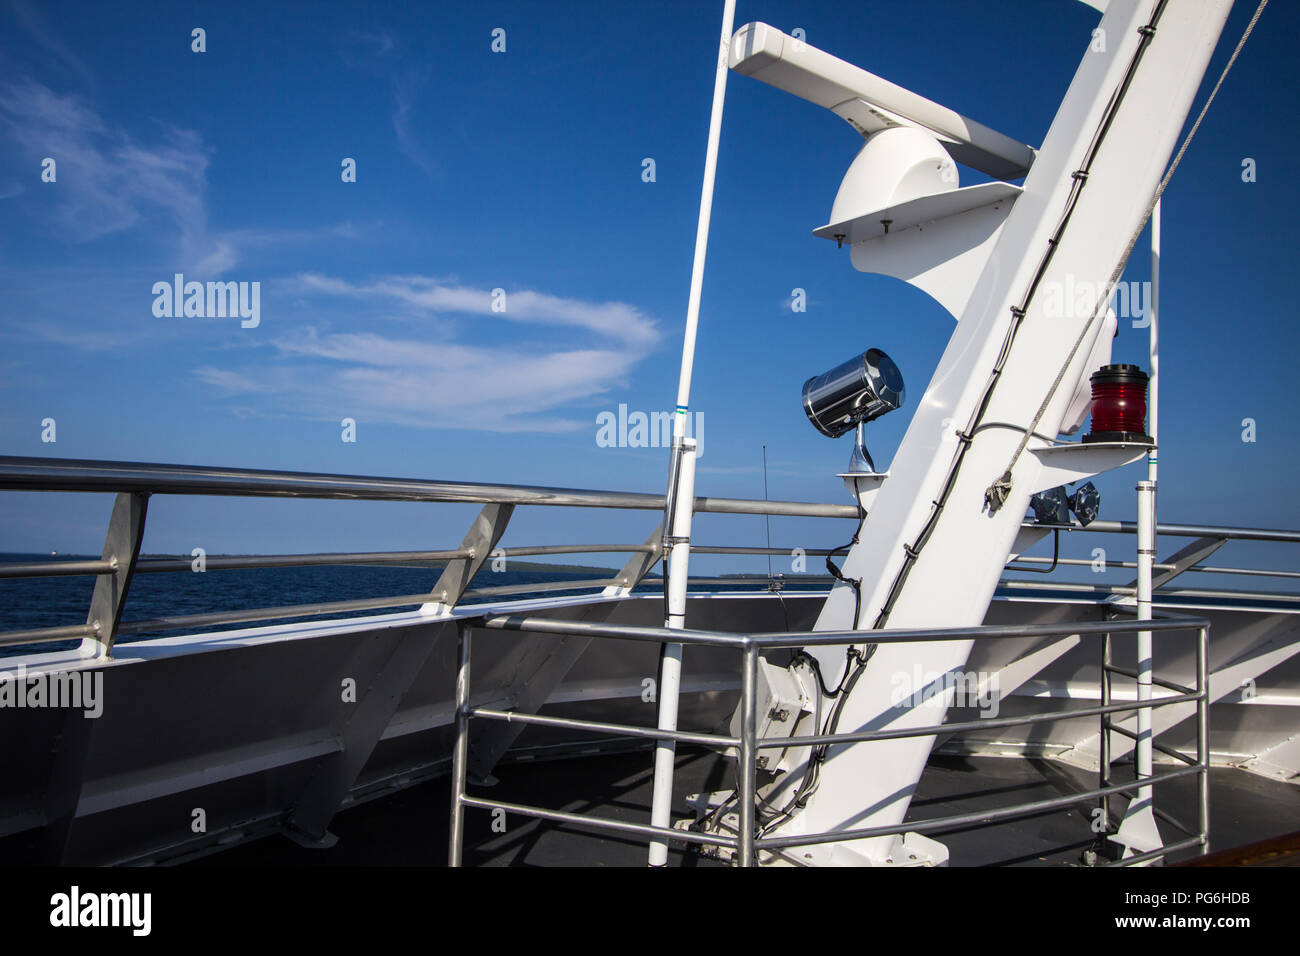 Boat Background. Deck of a large boat on a sunny summer day with blue sky and blue sea horizon Stock Photo